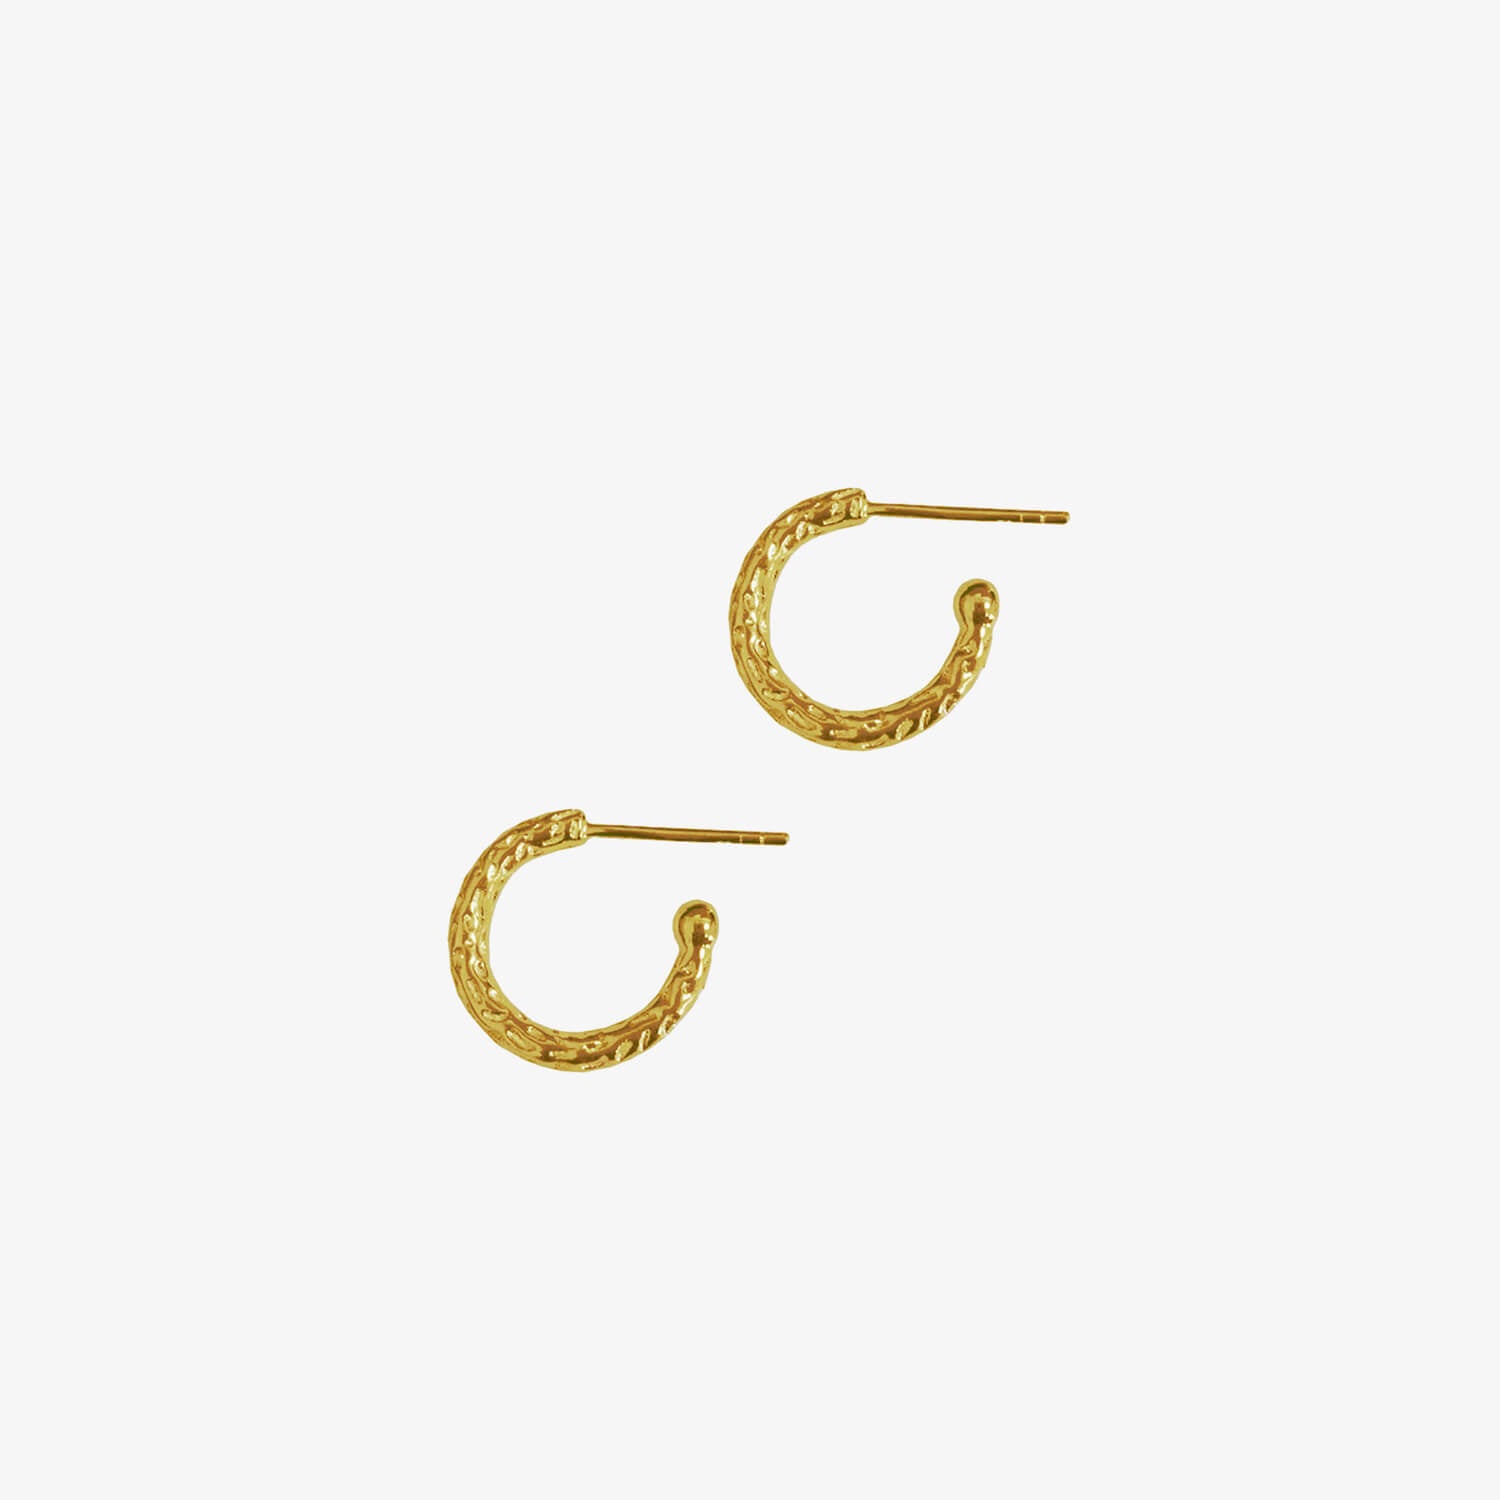 Small gold huggy hoops with a meteorite style textured finish on a white background